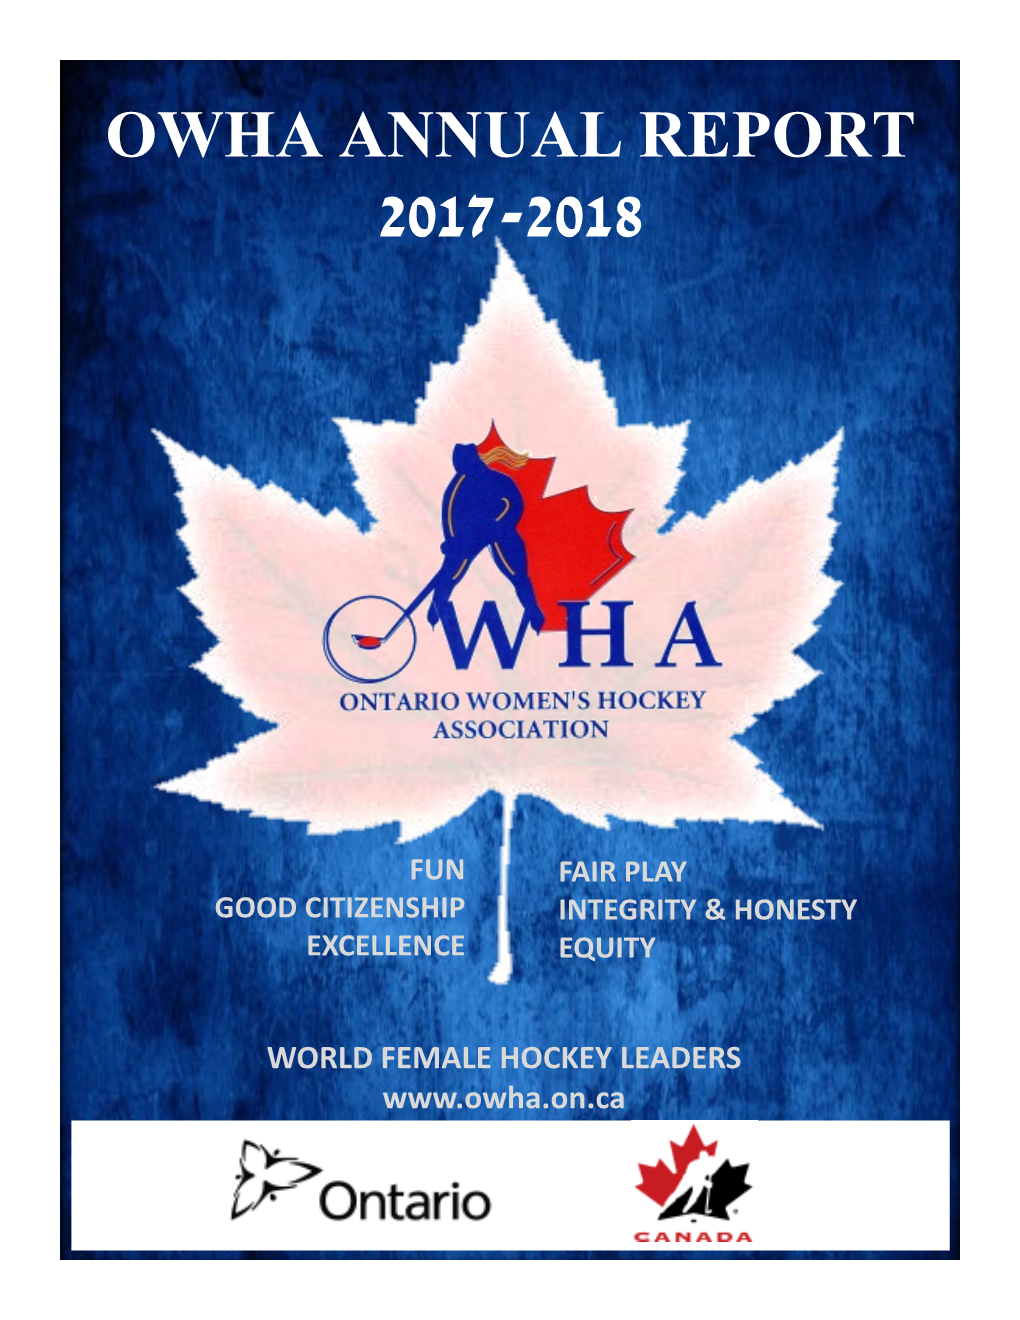 Owha Annual Report 2017-2018